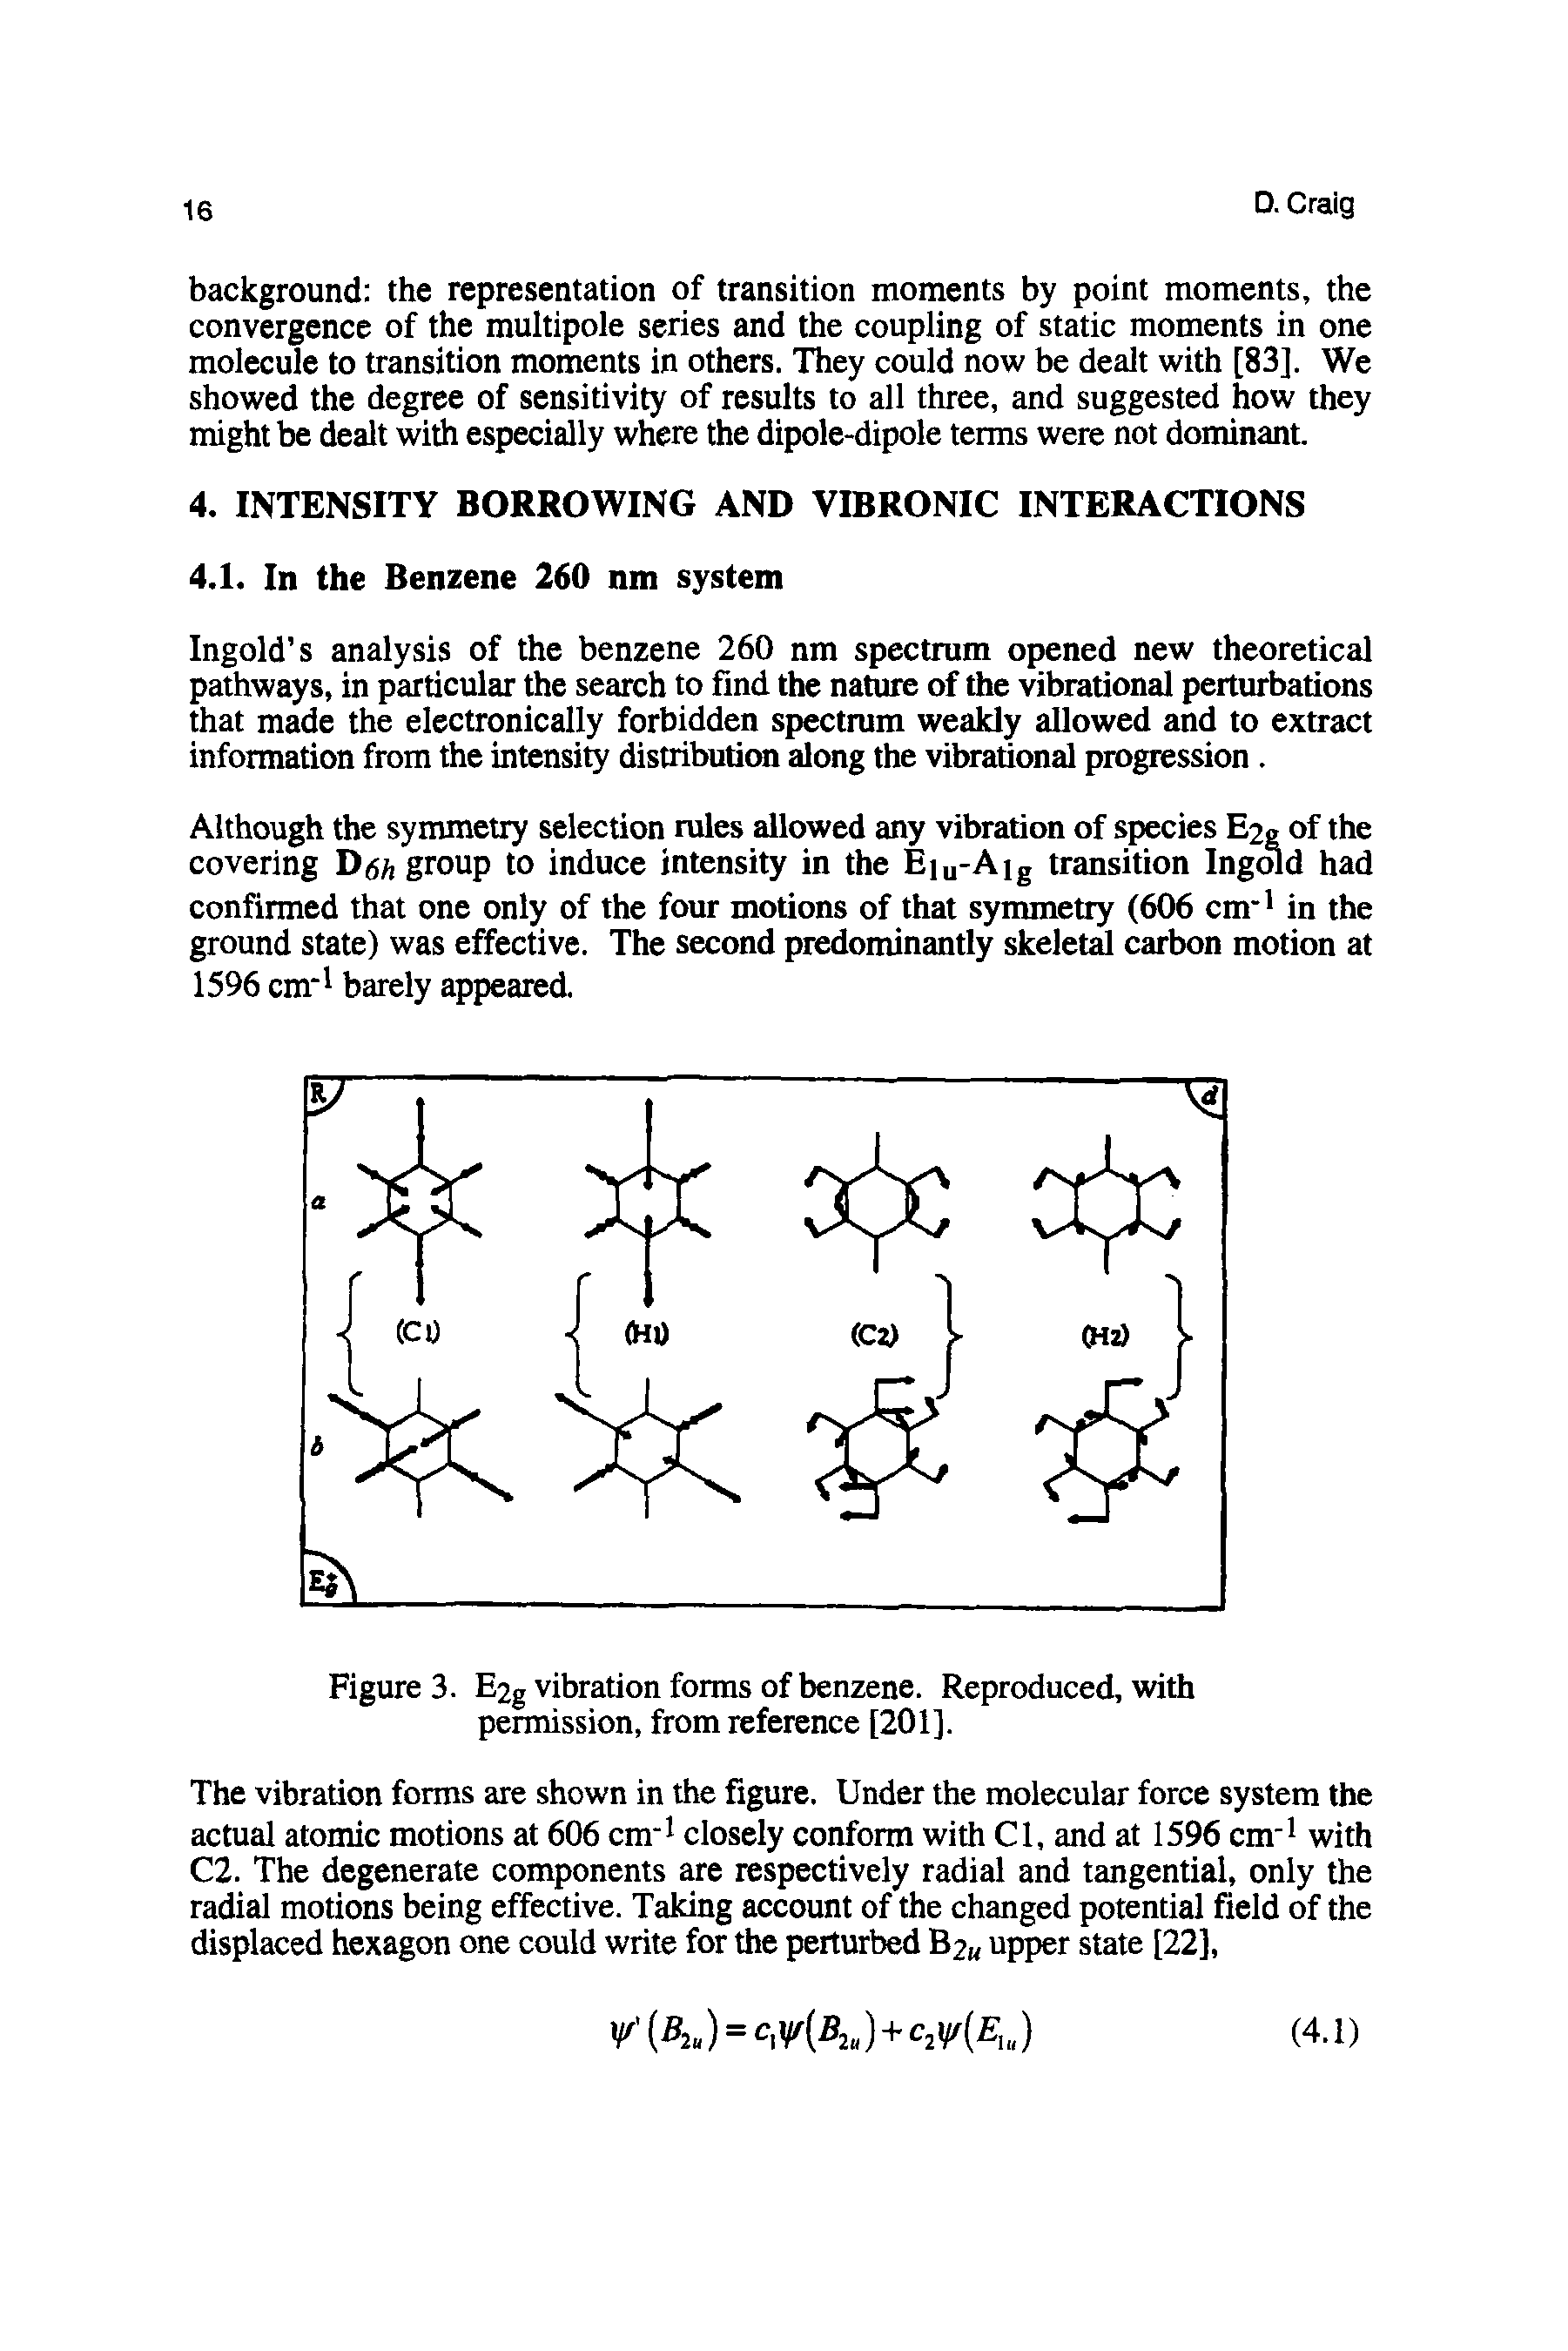 Figure 3. E2g vibration forms of benzene. Reproduced, with permission, from reference [201].